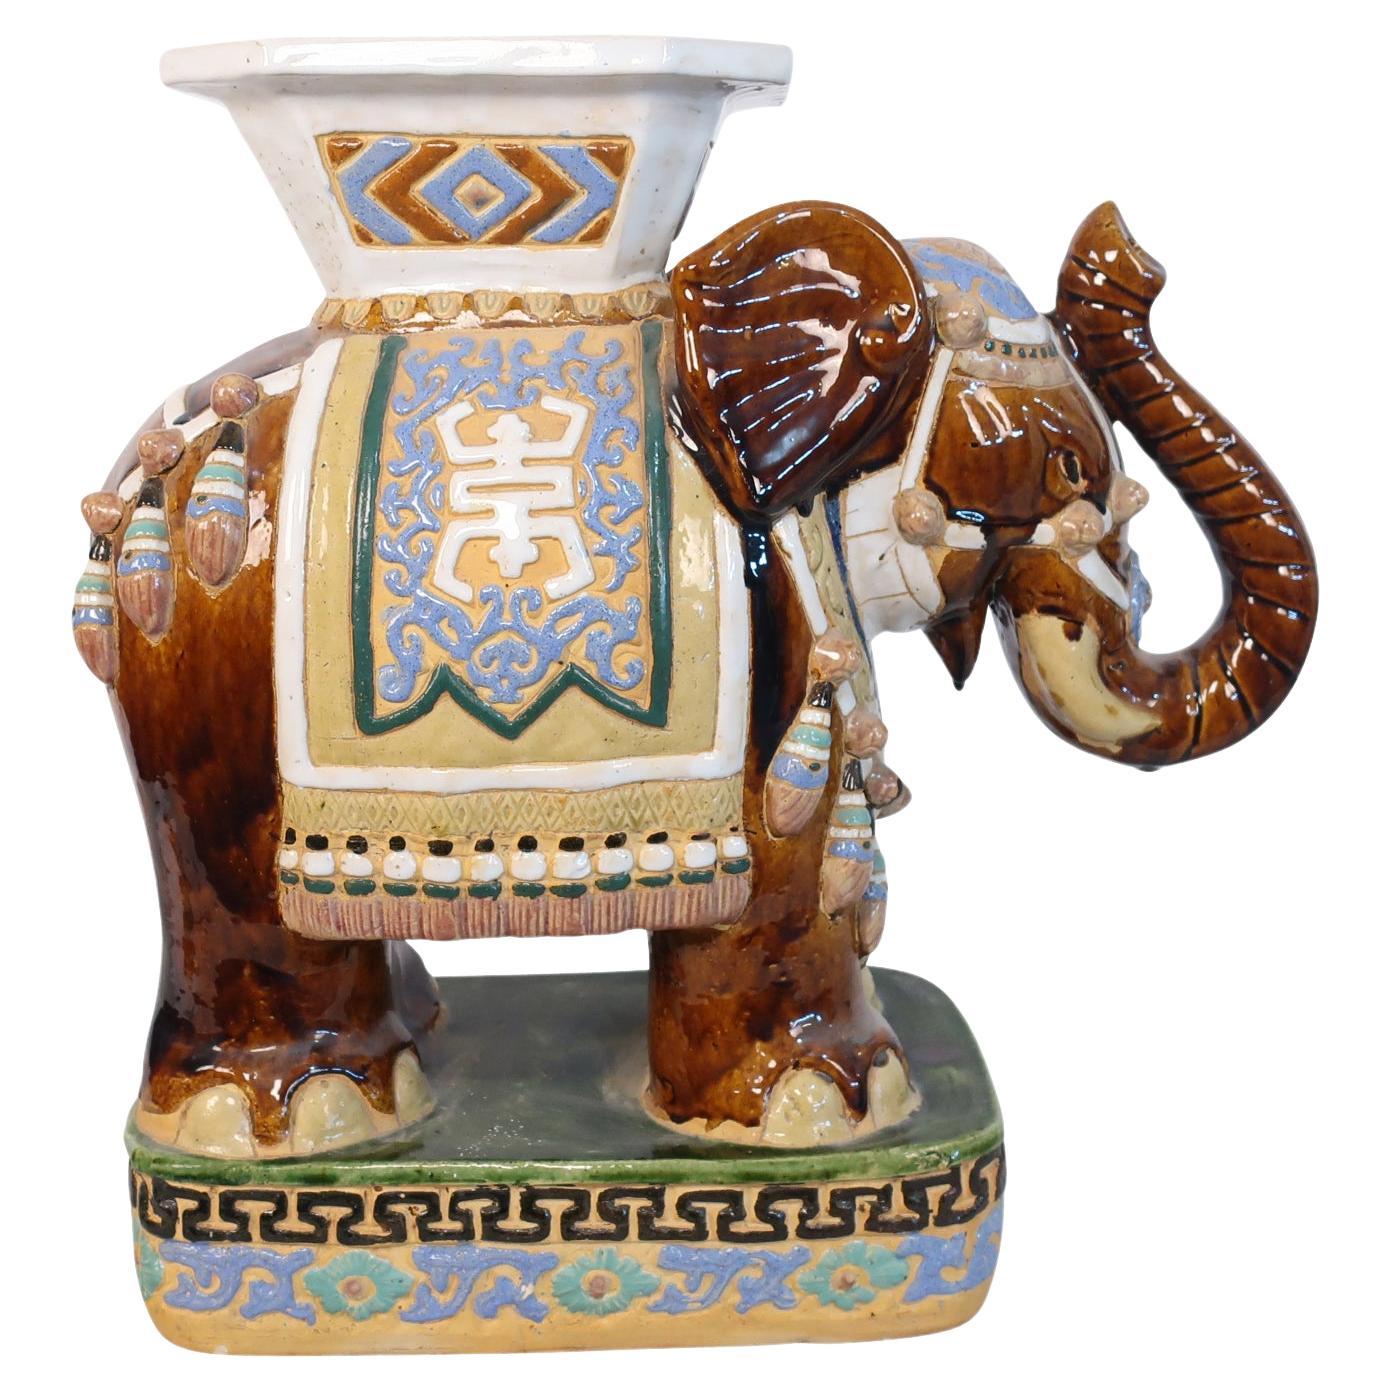 Single ceramic brown Asian elephant garden stool with brown yellow and white color and gold, green, and light lilac saddles and trim. The stool portrays an elephant with raised trunk. This adorable stool is perfect to set your drink down on as a